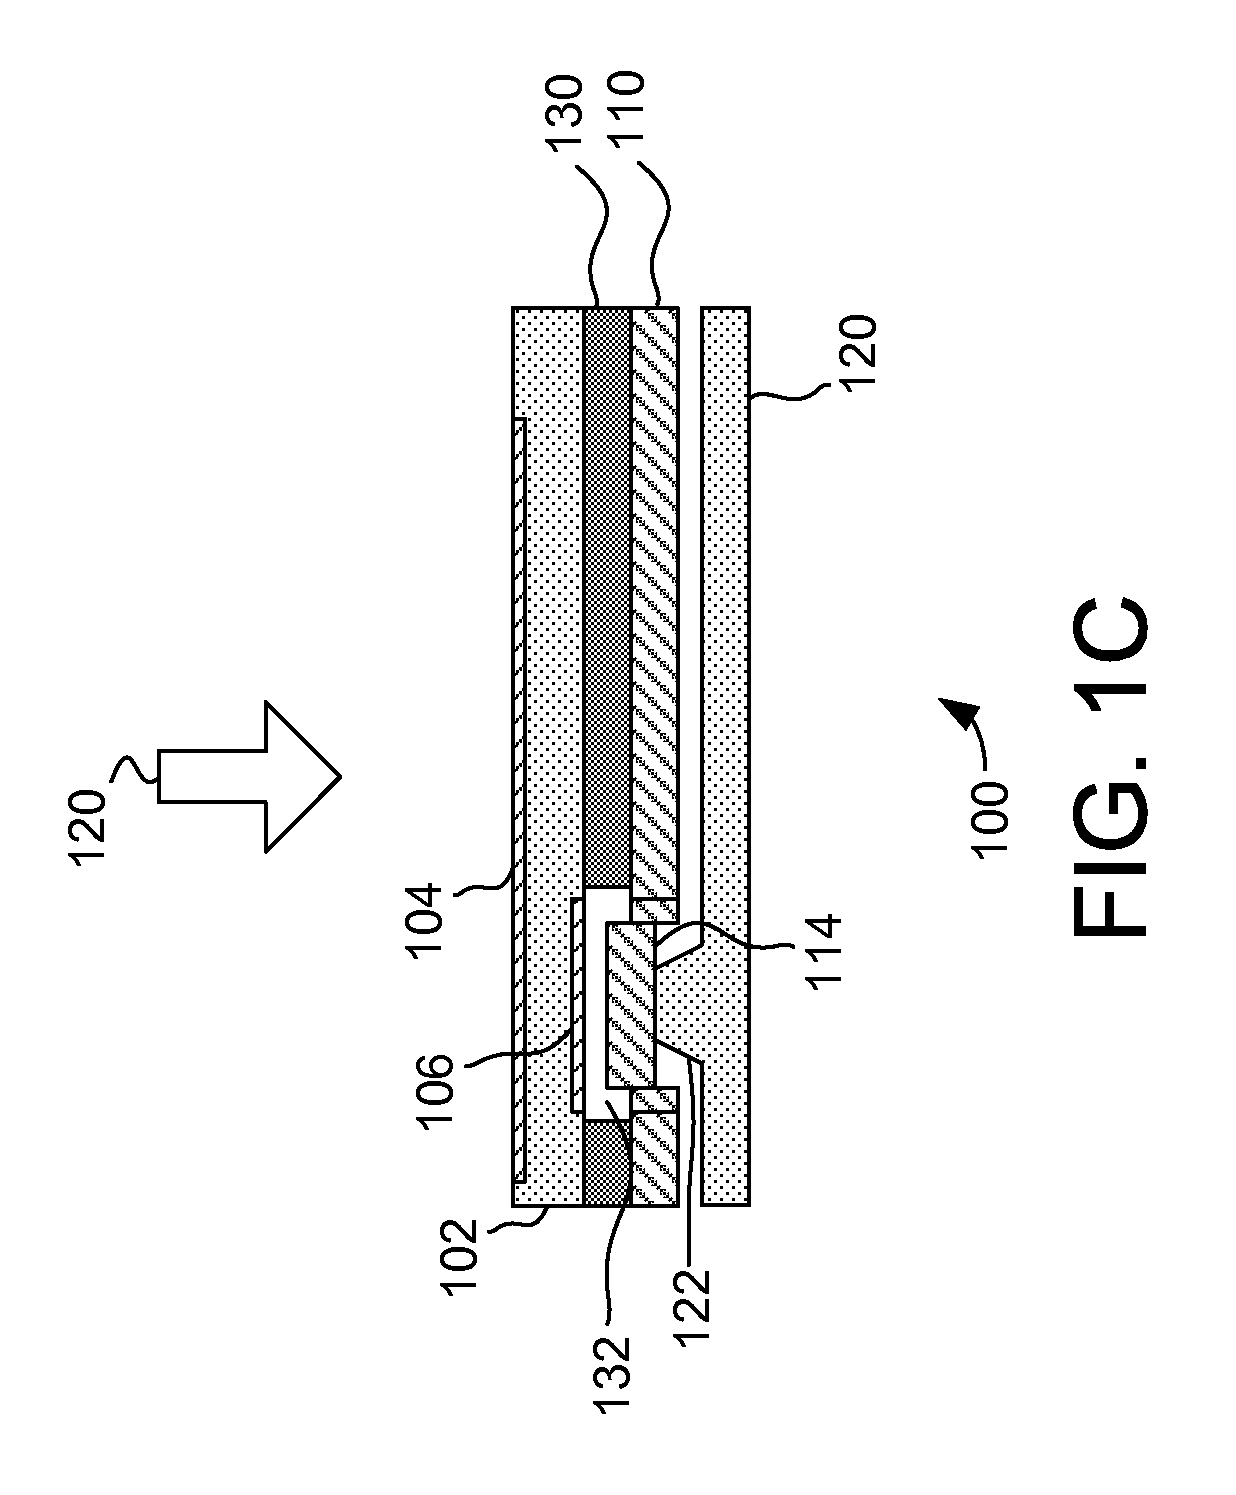 Input device with force sensing